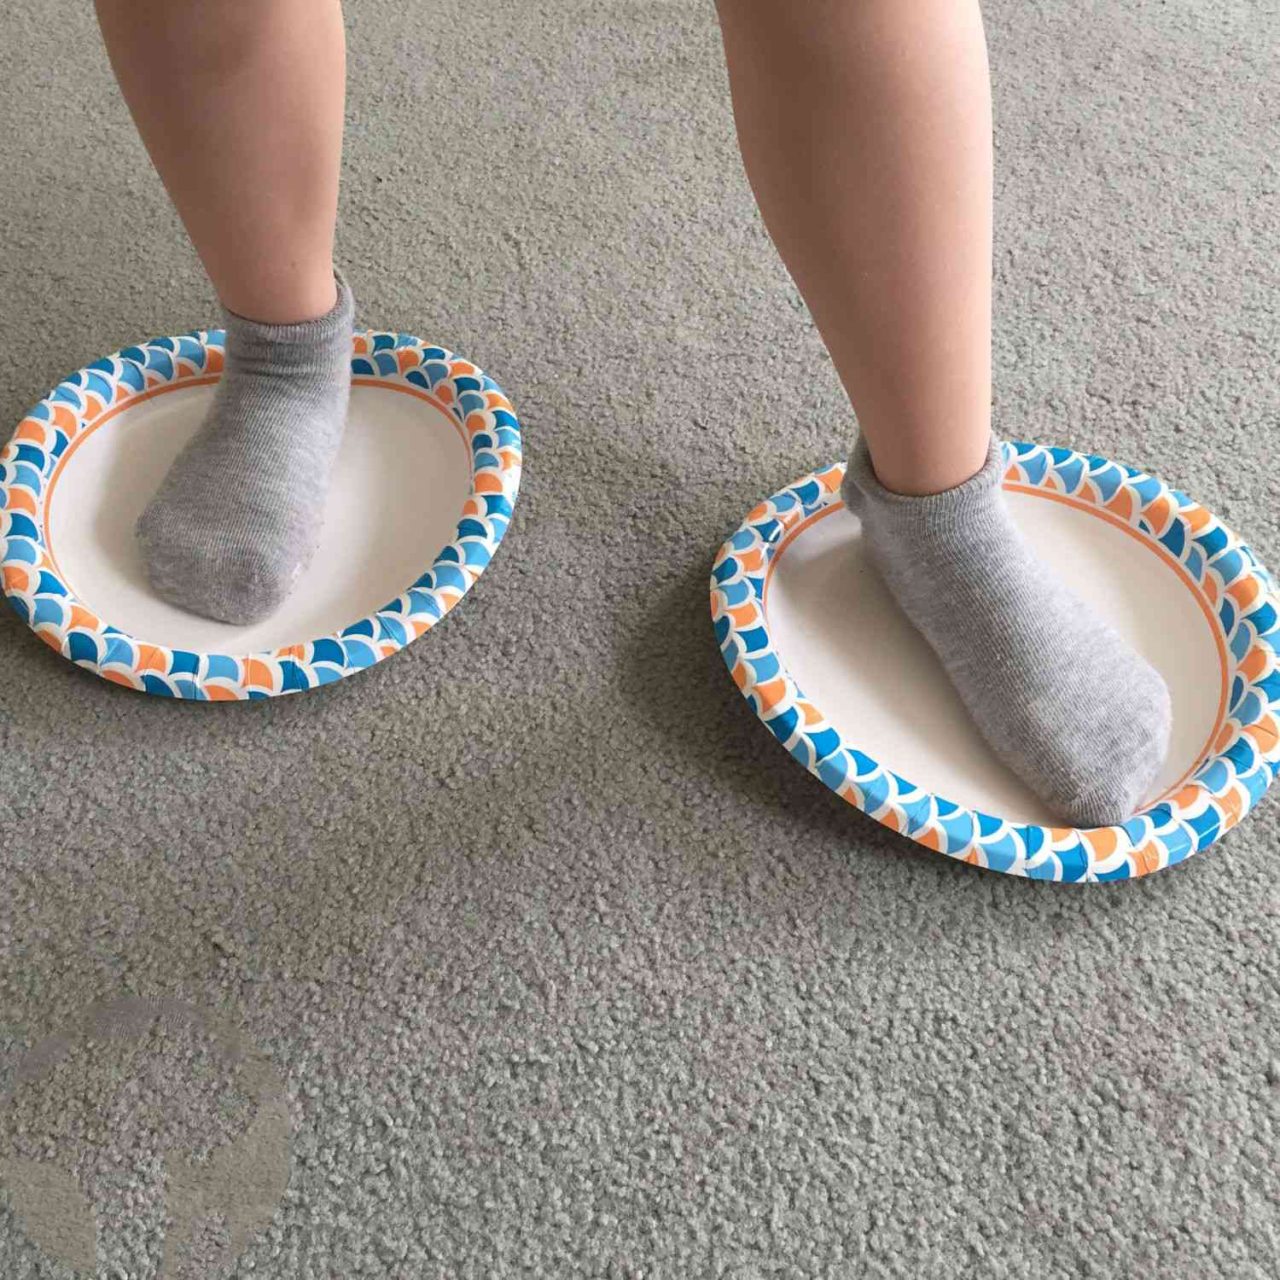 3 Movement Activities with Paper Plates 3